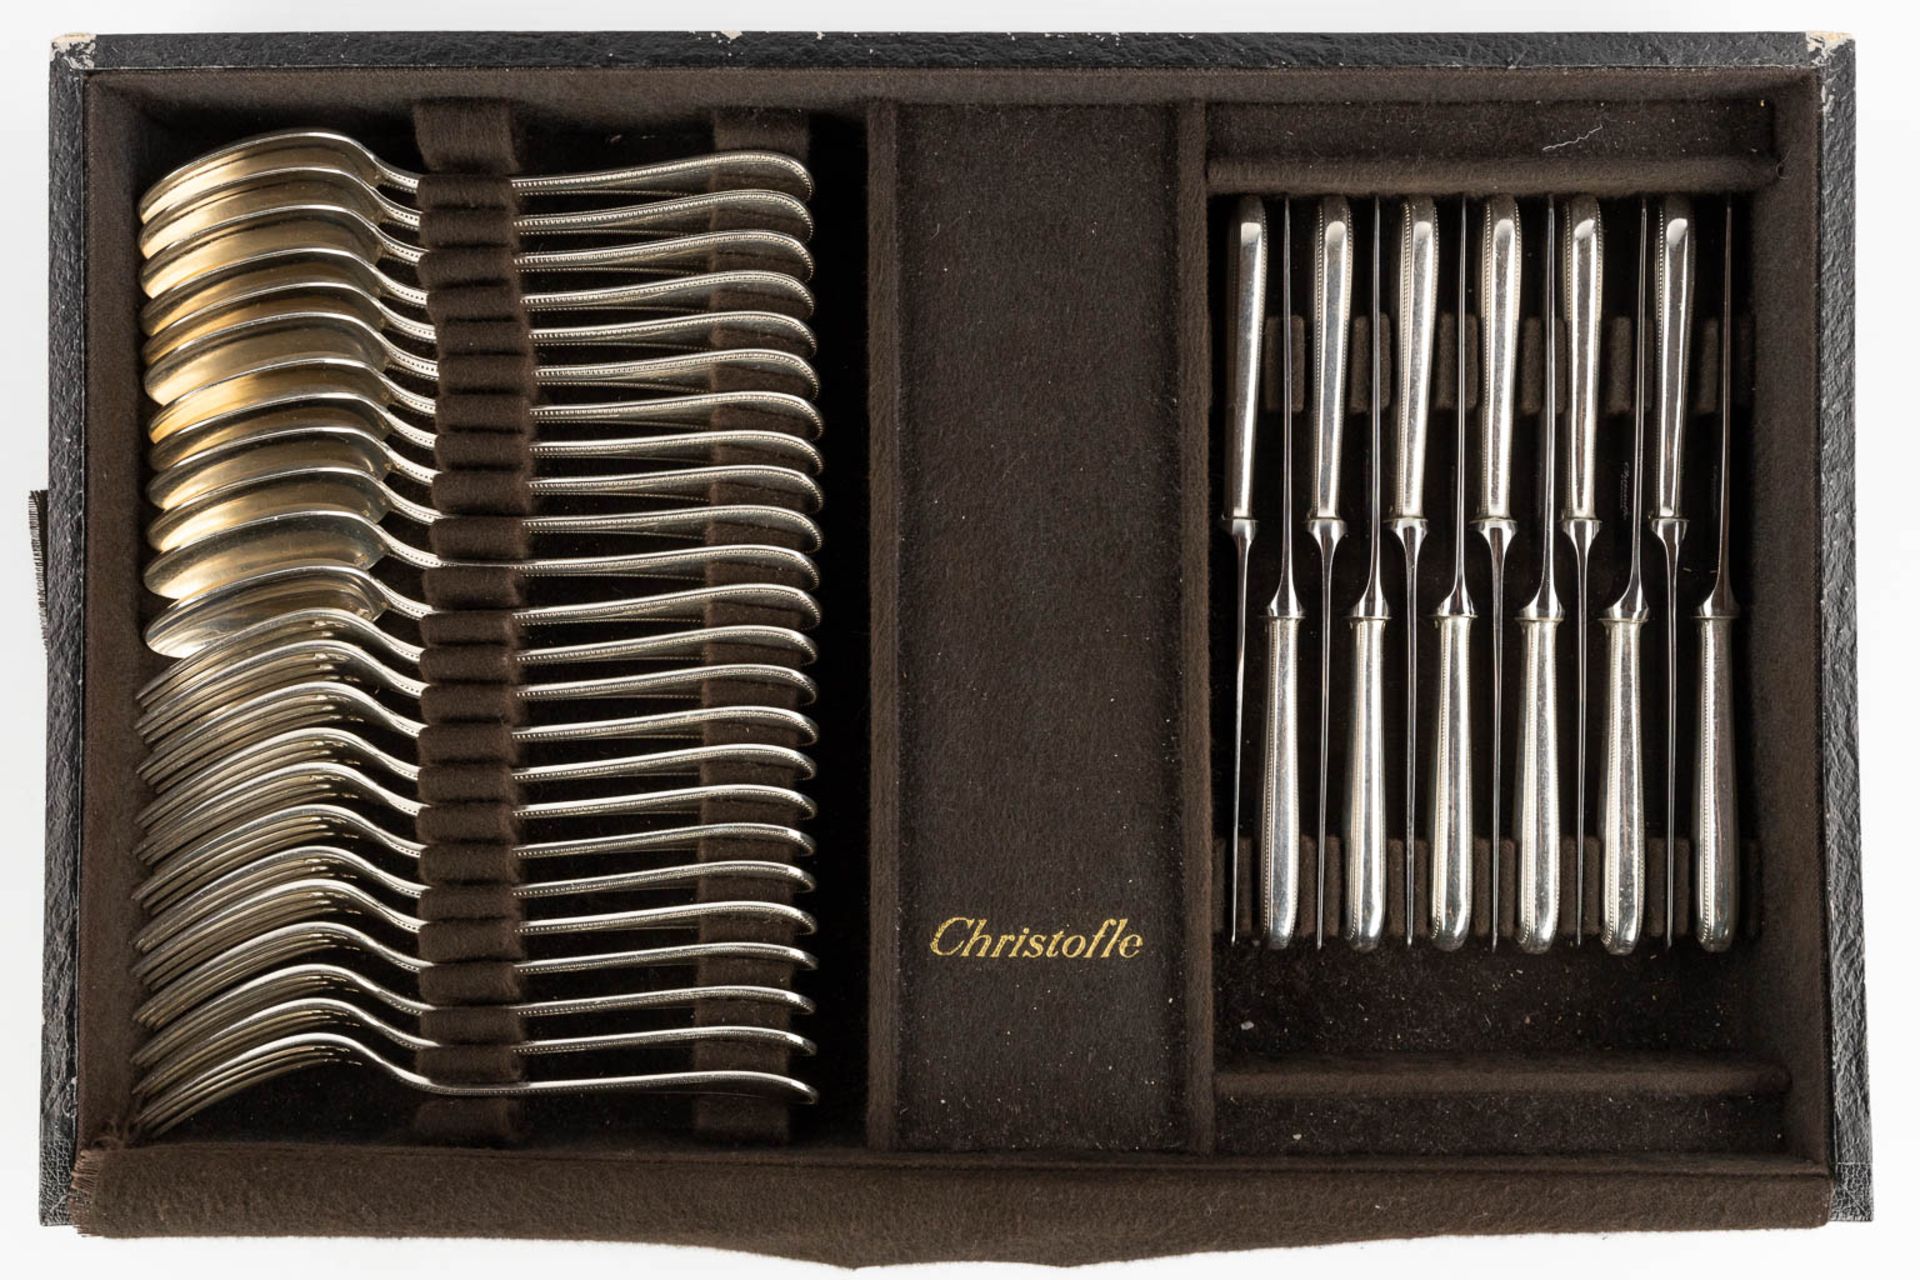 Christofle 'Perles' a large silver-plated cutlery in a storage box. 144 pieces. (D:29 x W:46 x H:33 - Image 18 of 21